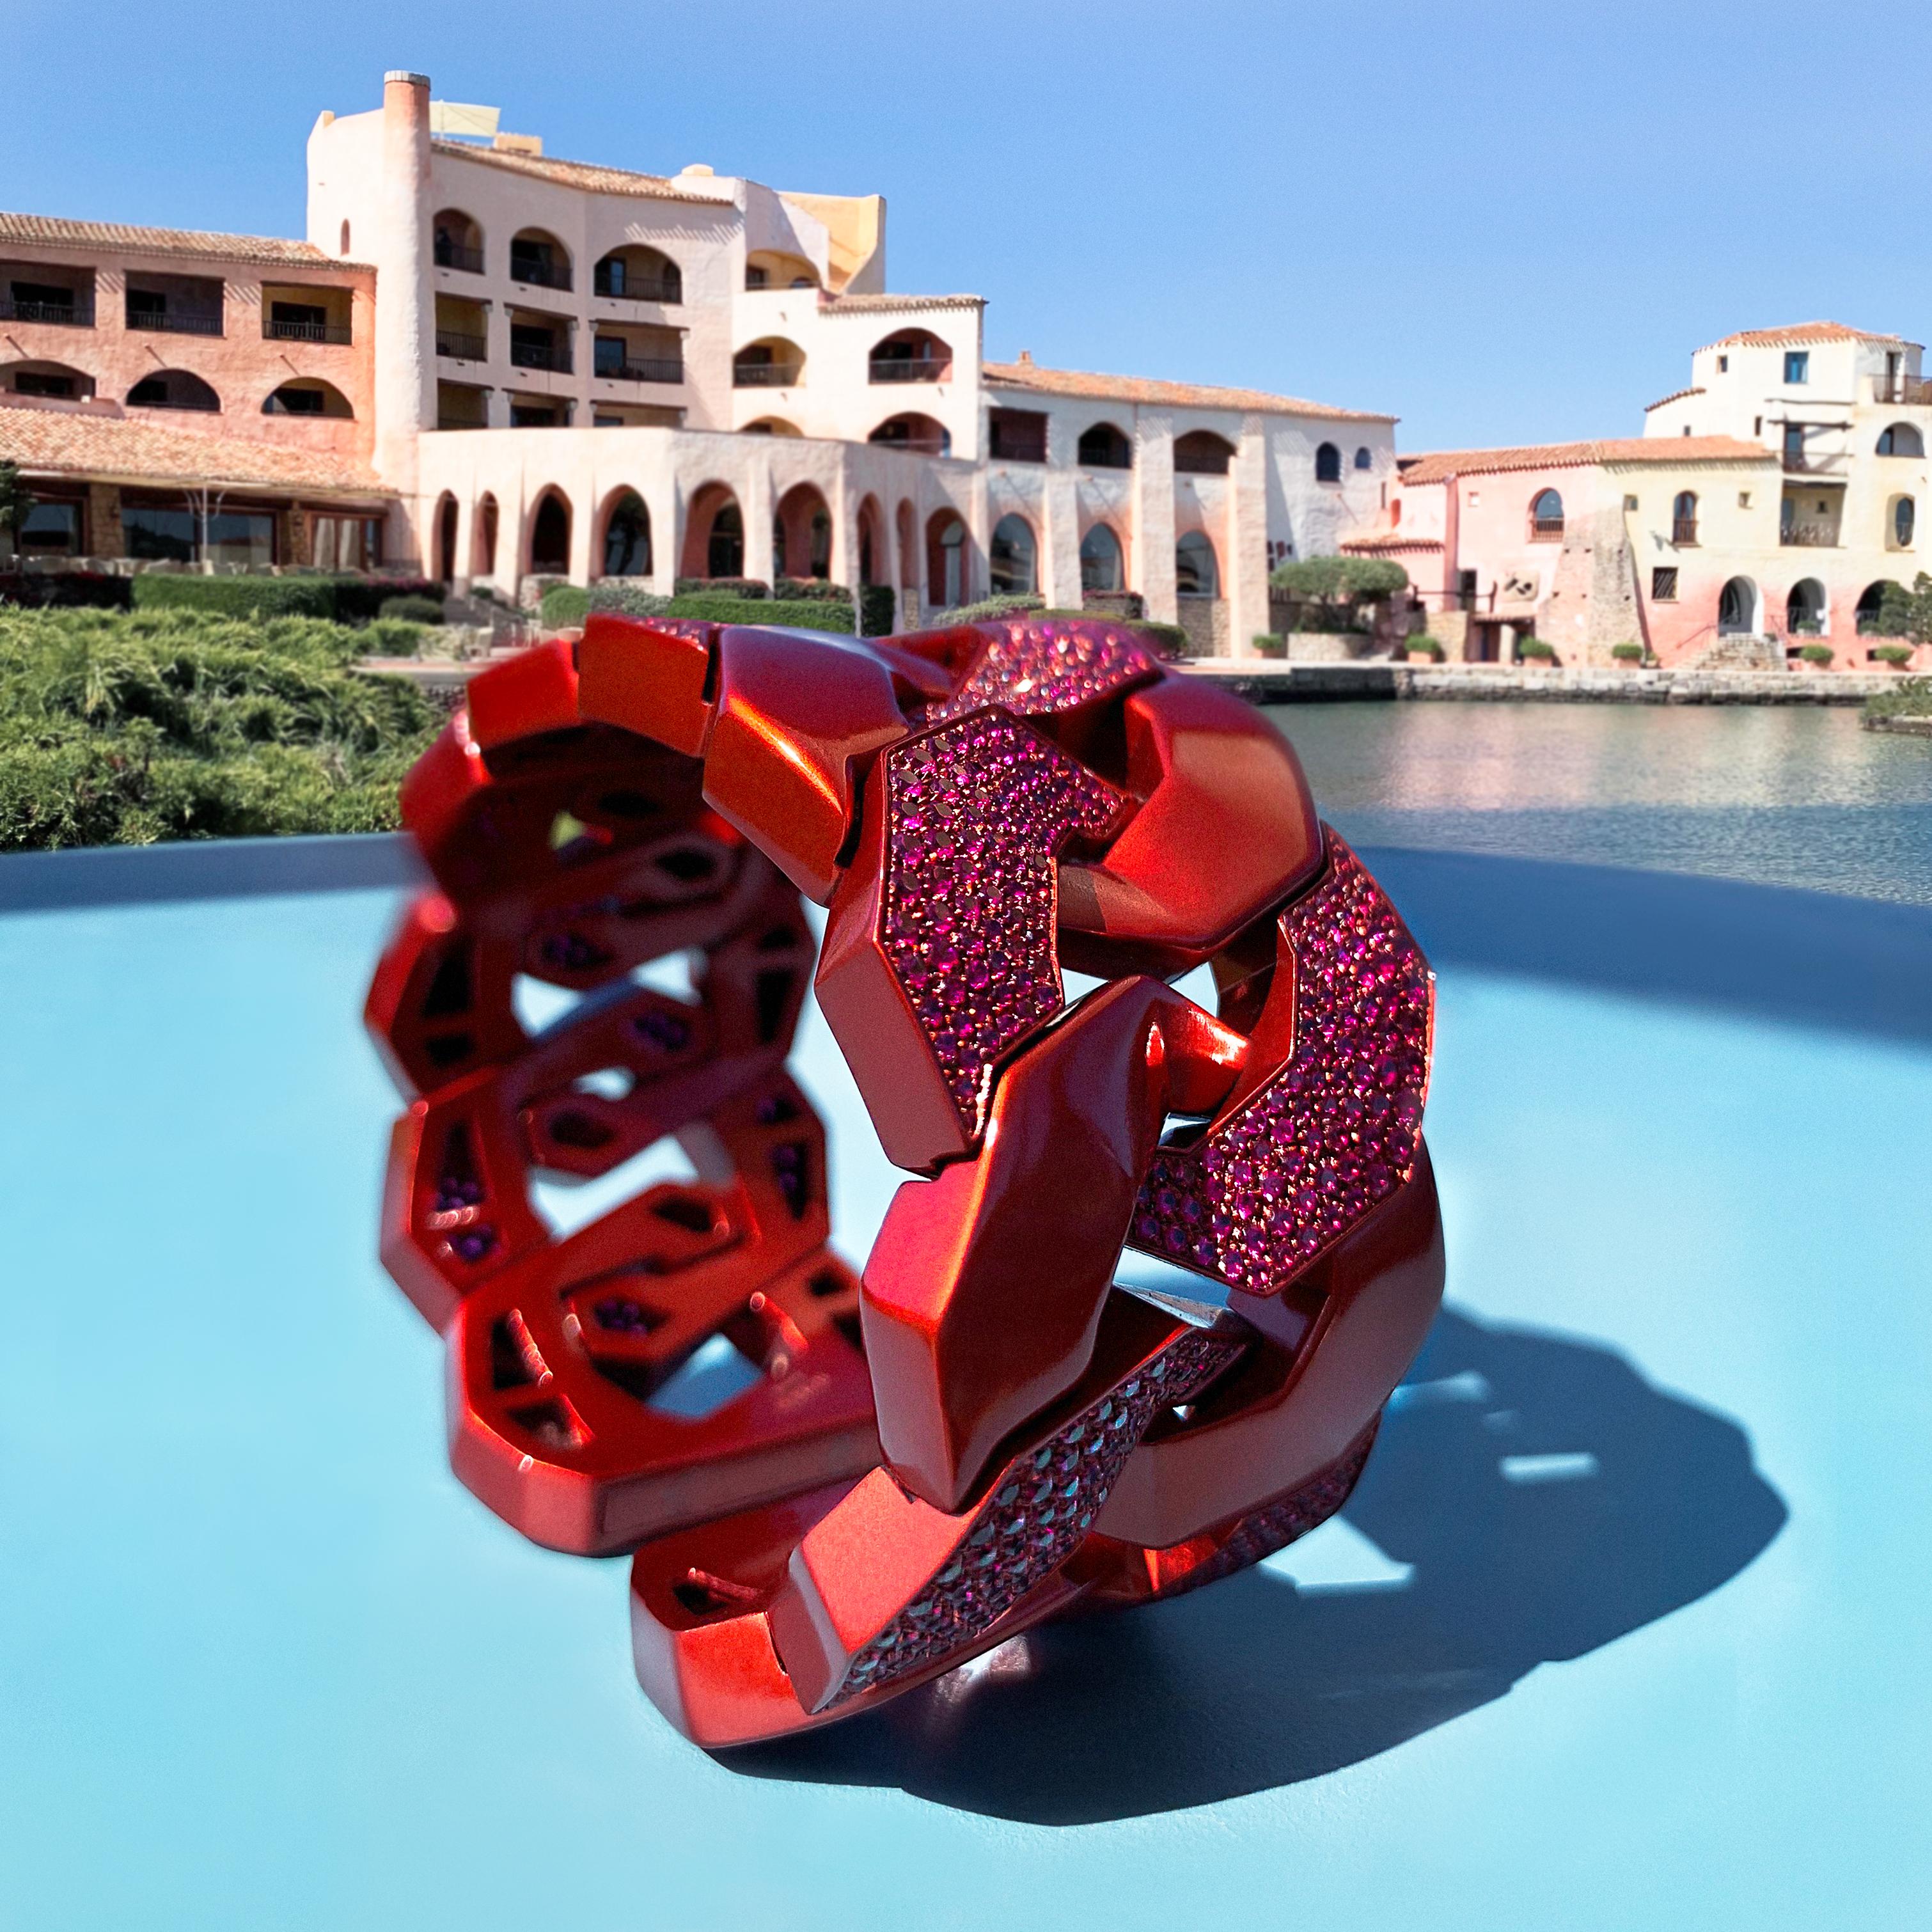 Sabbadini Titanium & Rubies Micropave, Dark Red Griffes Bracelet
Rubies 8,69 Carats.
The innovative use of titanium combined with precious stones, makes this bracelet incredibly flexibile and light.
Hand made jewelry & designed in Milan, in Via